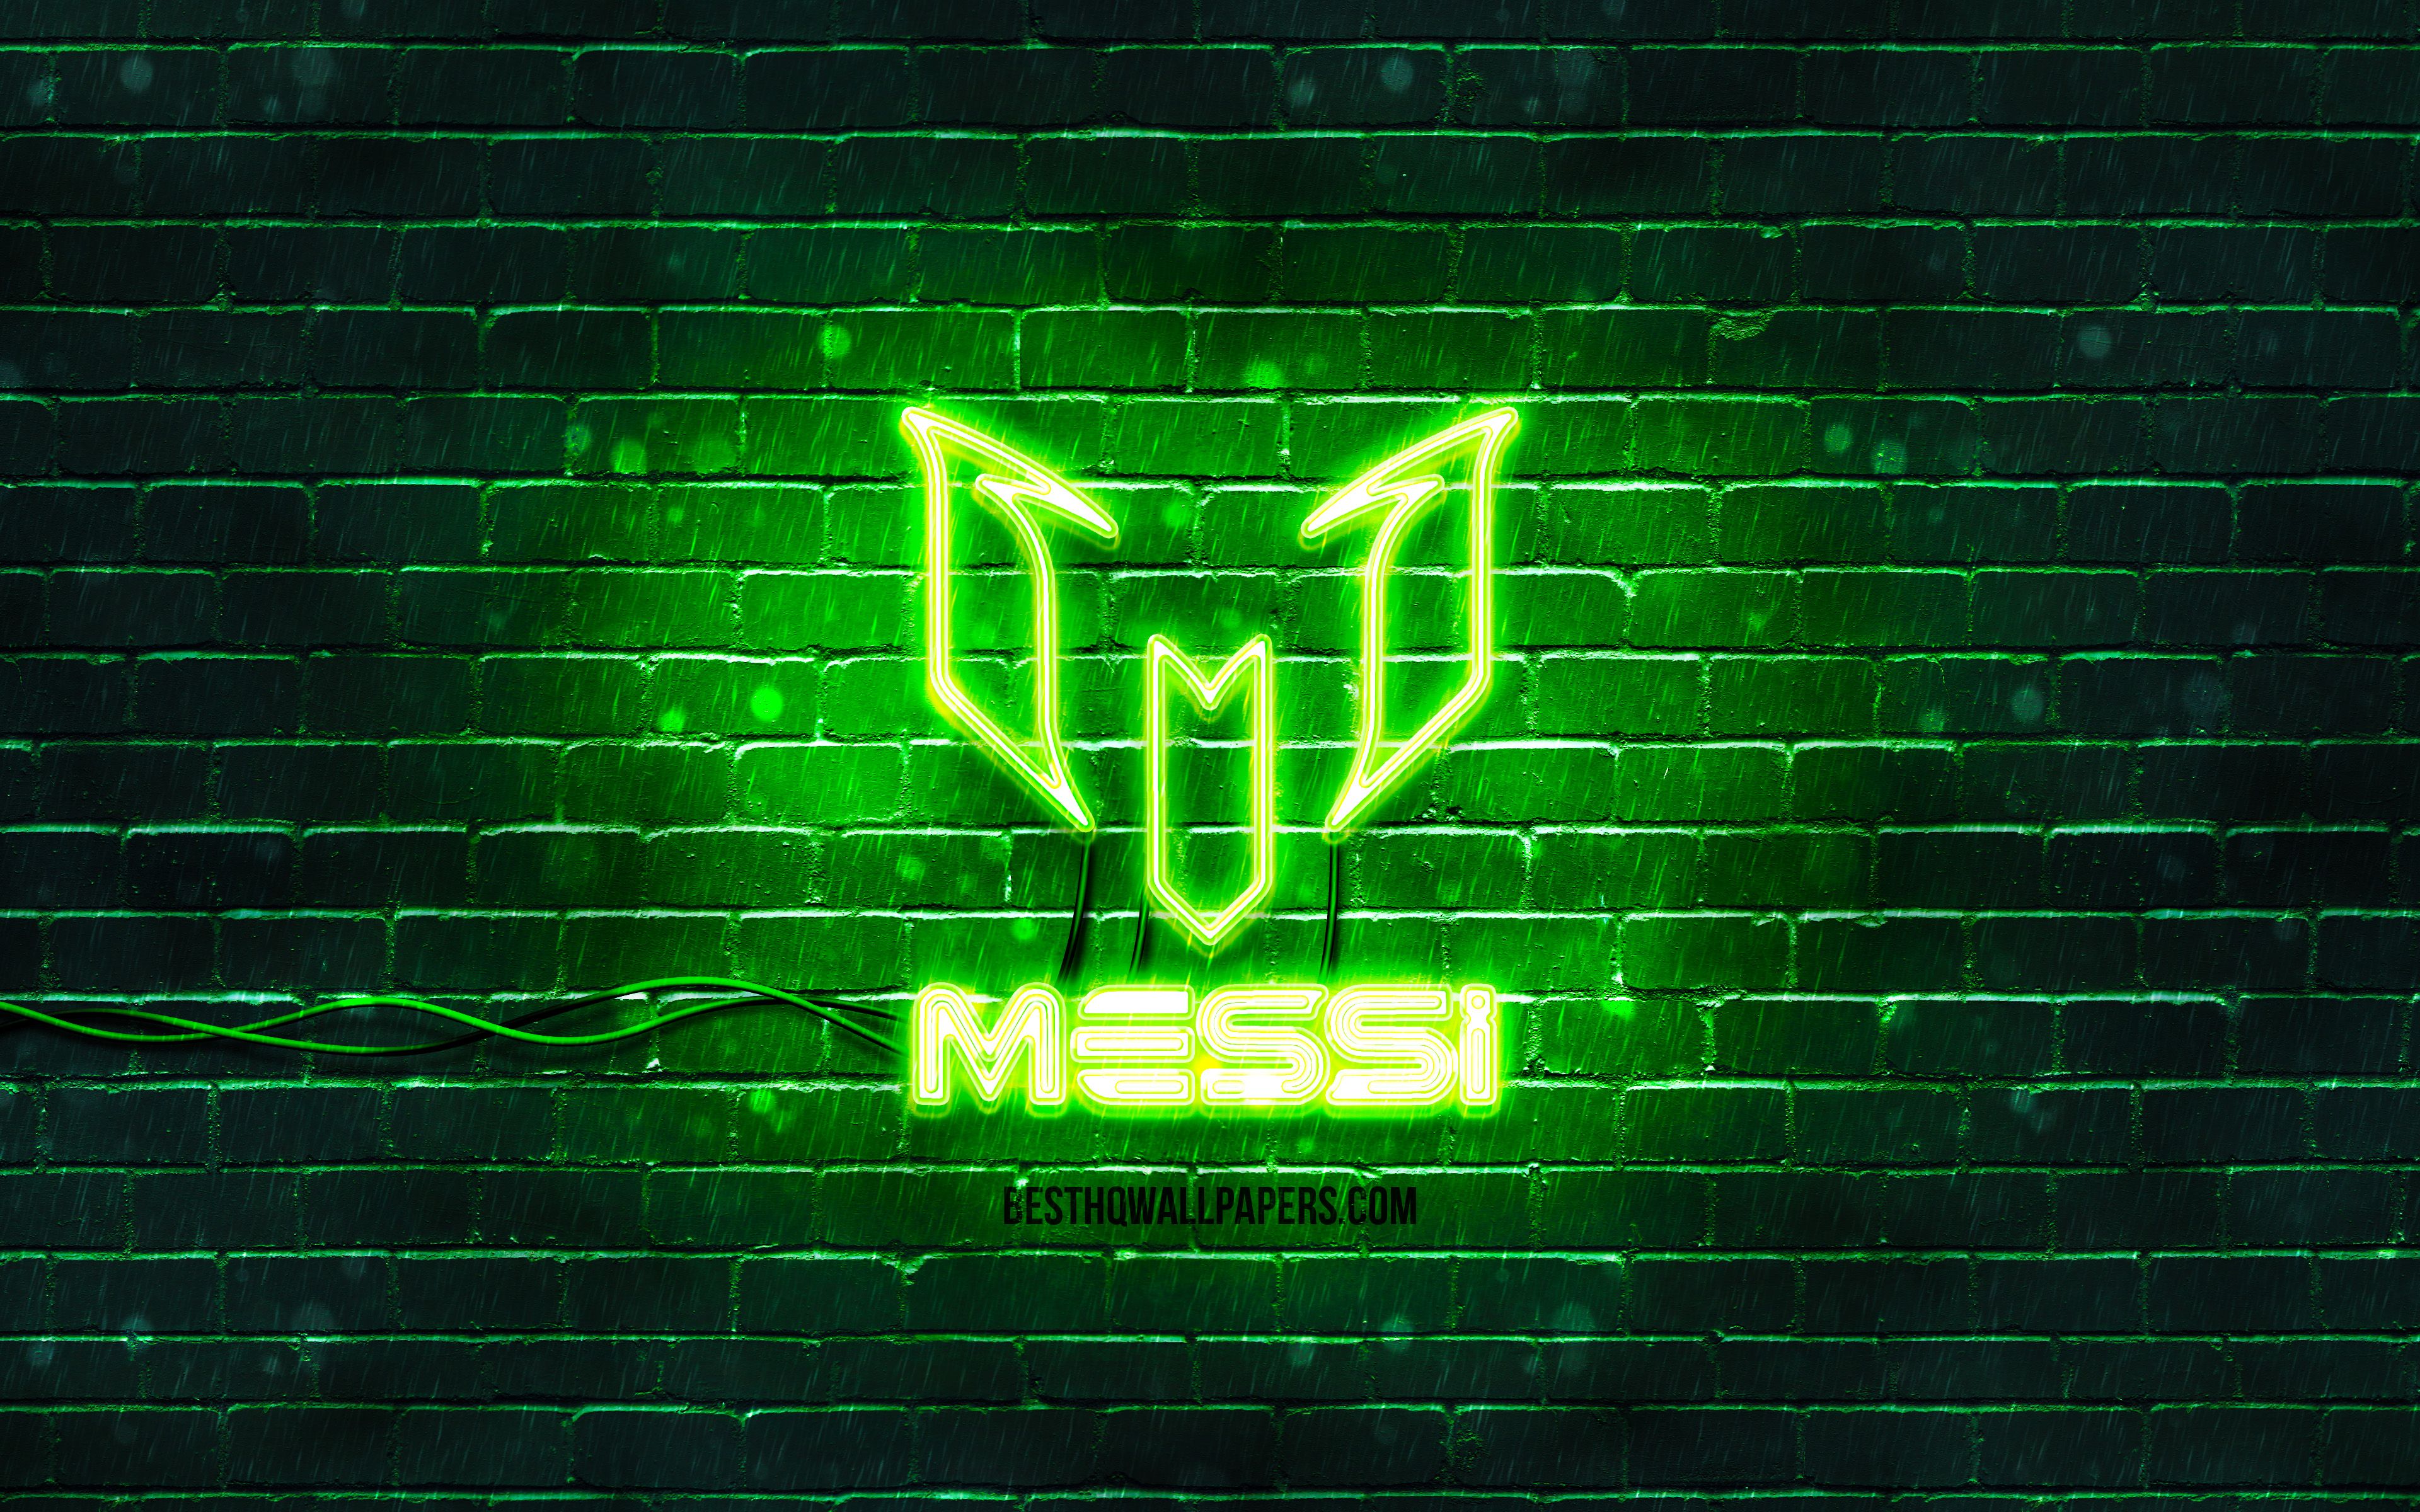 Download wallpaper Lionel Messi green logo, 4k, green brickwall, Leo Messi, fan art, Lionel Messi logo, football stars, Lionel Messi neon logo, Lionel Messi for desktop with resolution 3840x2400. High Quality HD